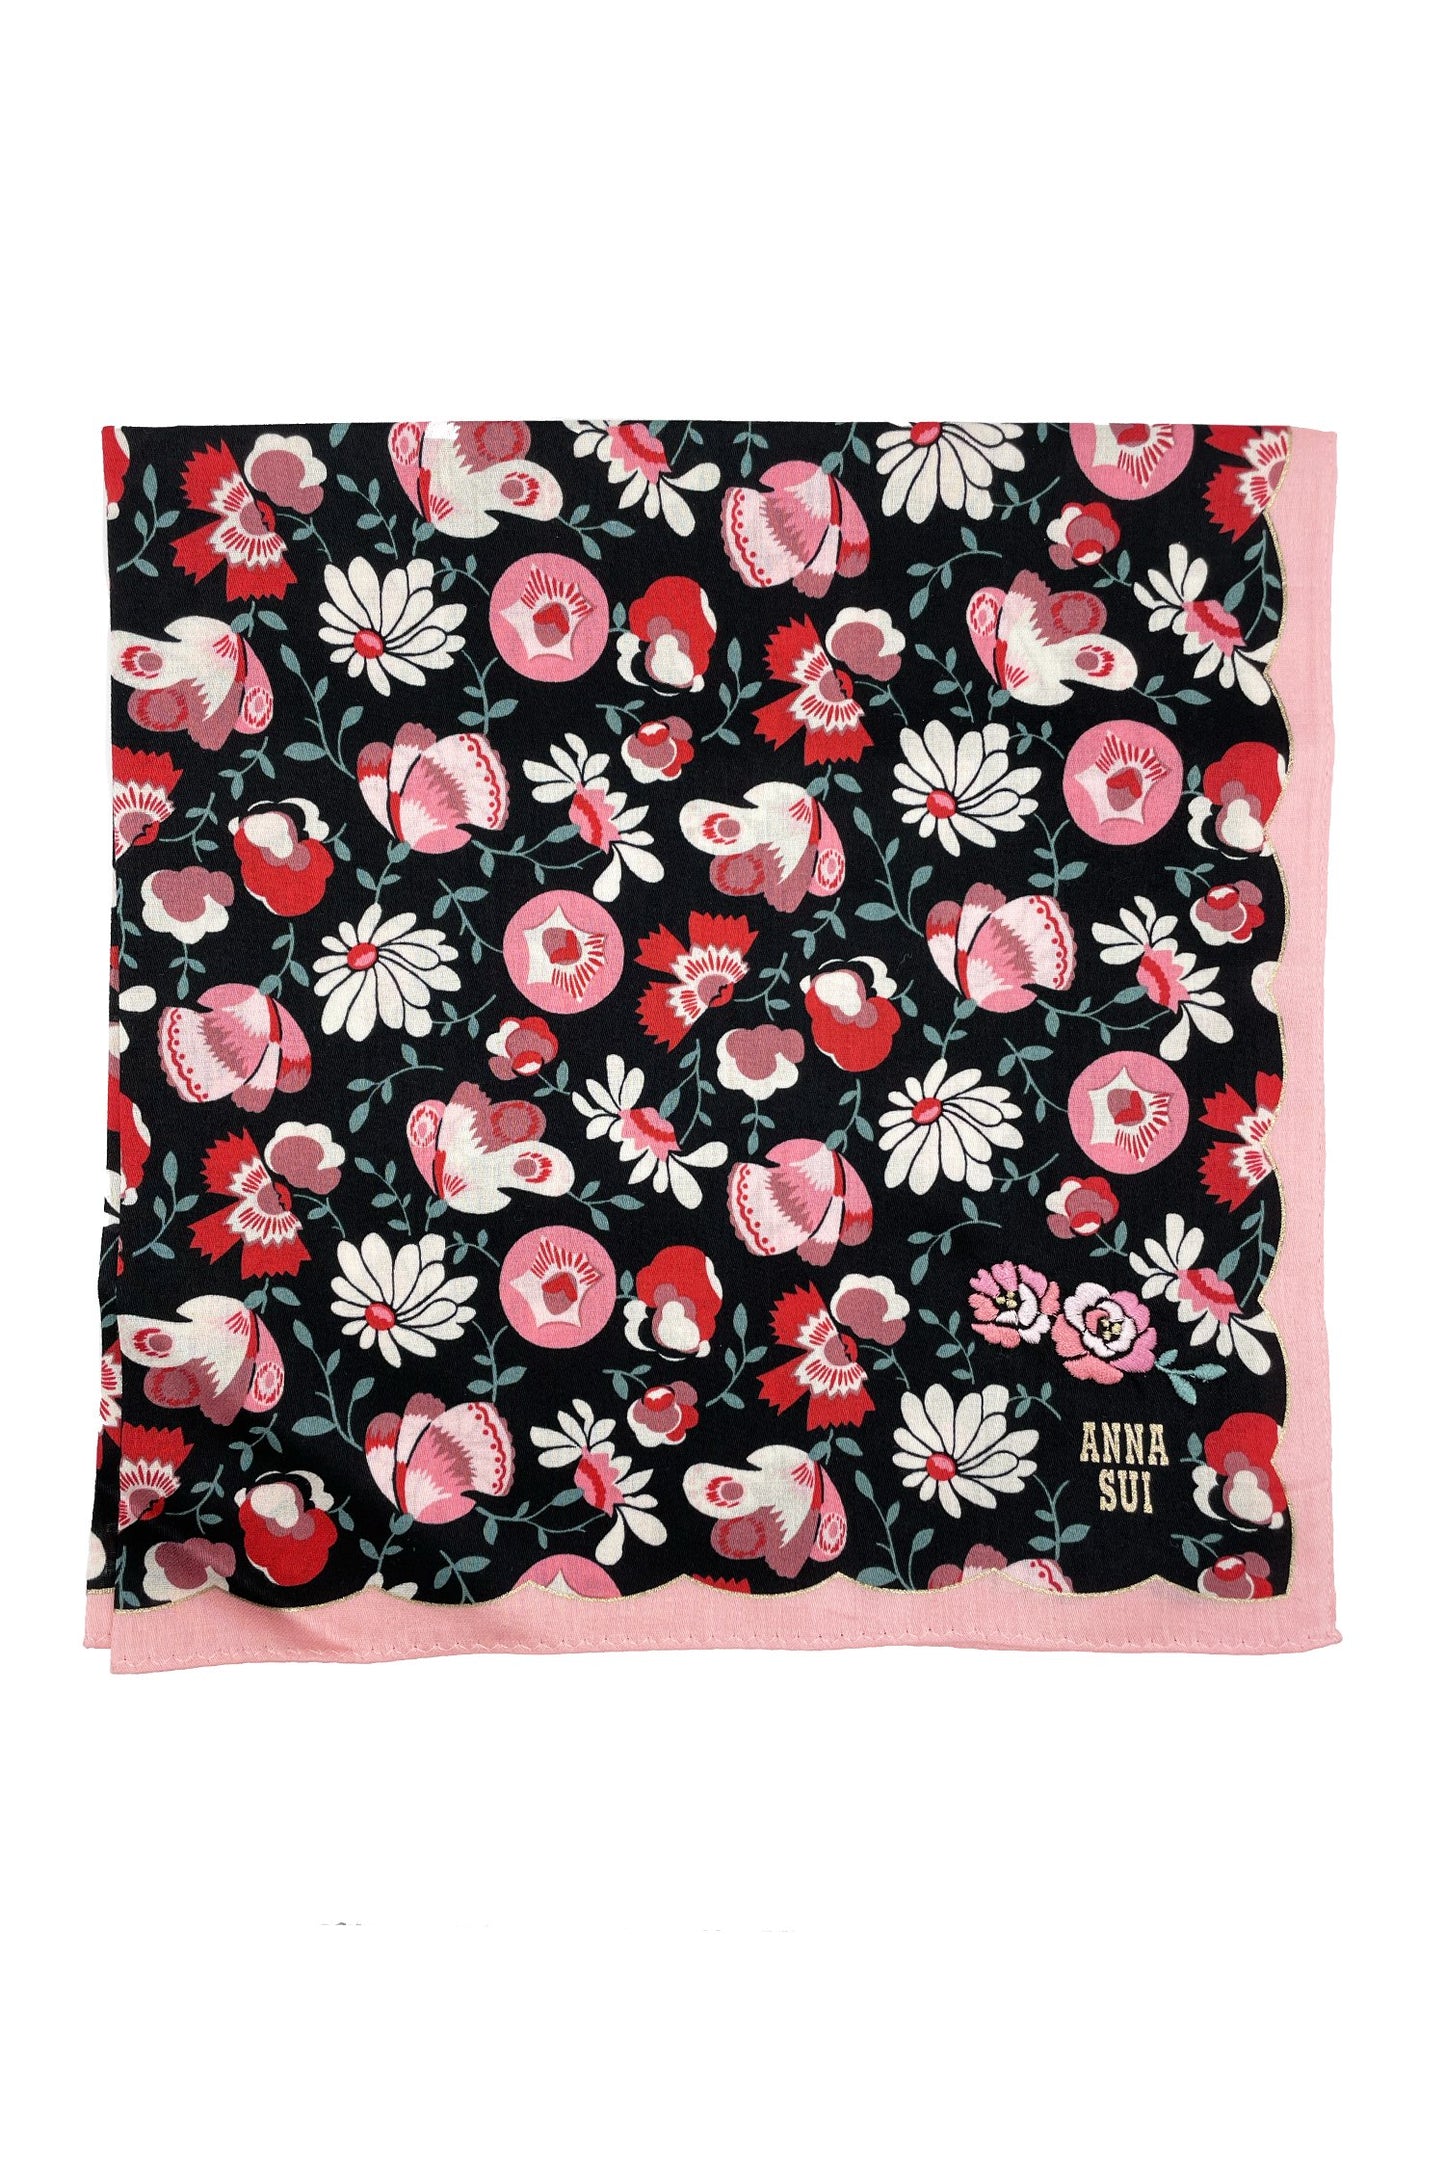 Handkerchief with white/red daisy on black, wavy baby pink hems, Anna’s label in corner